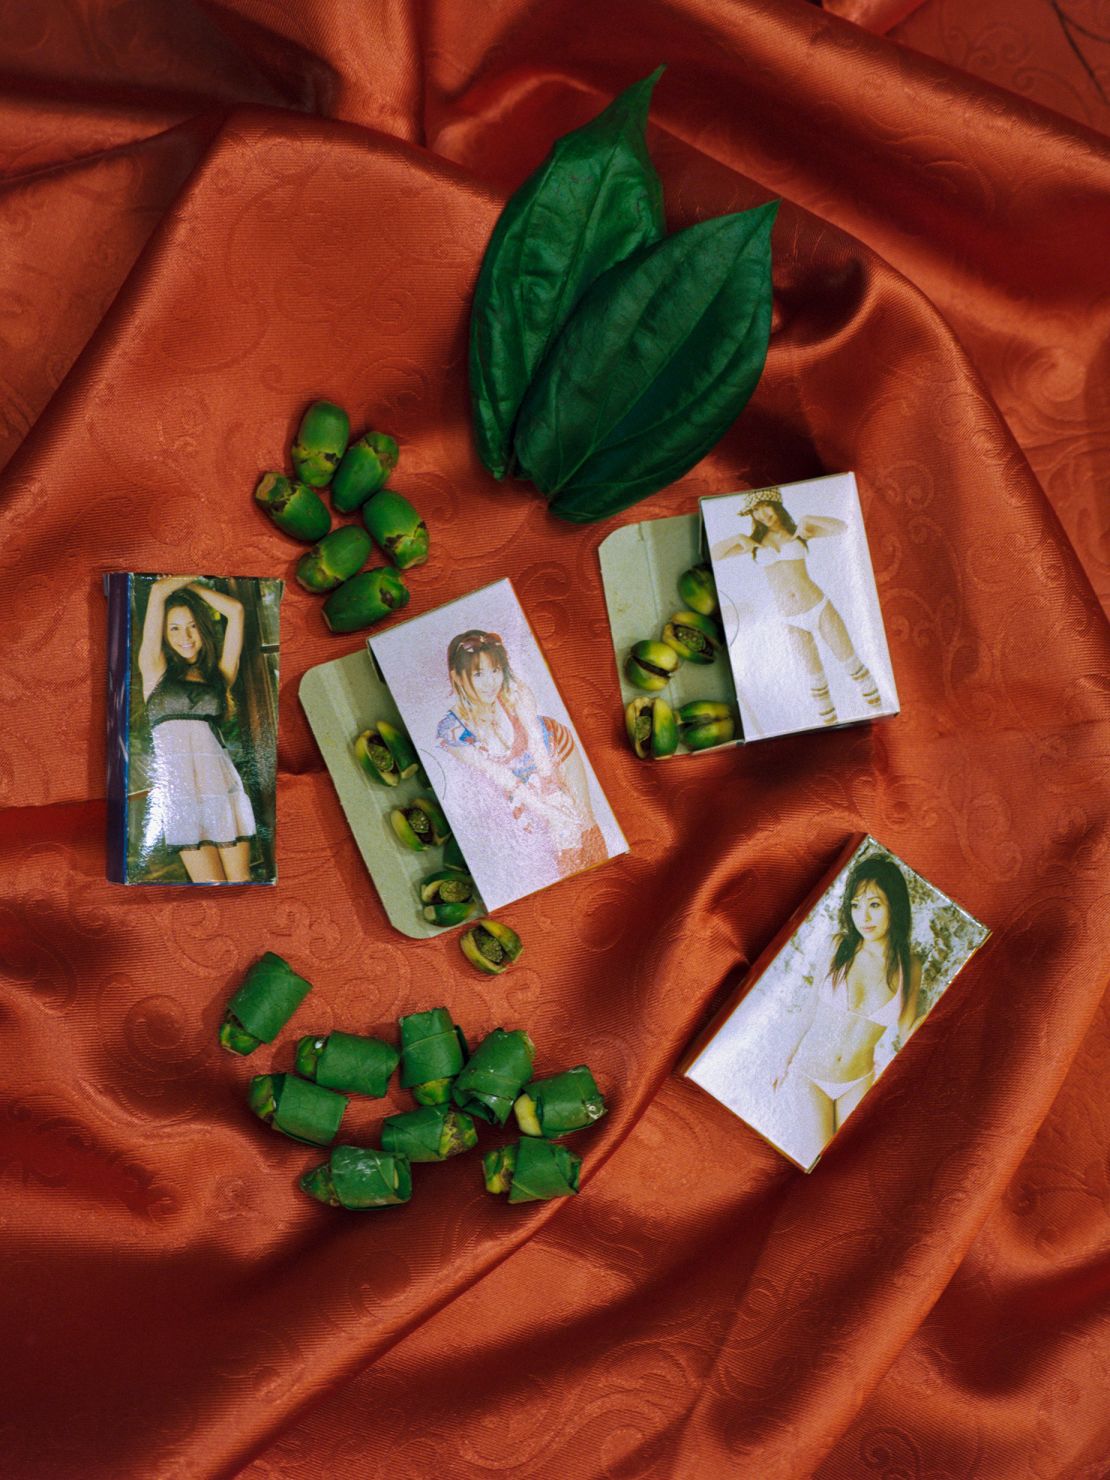 Betel nuts are sometimes packaged in boxes featuring imagery of young women.